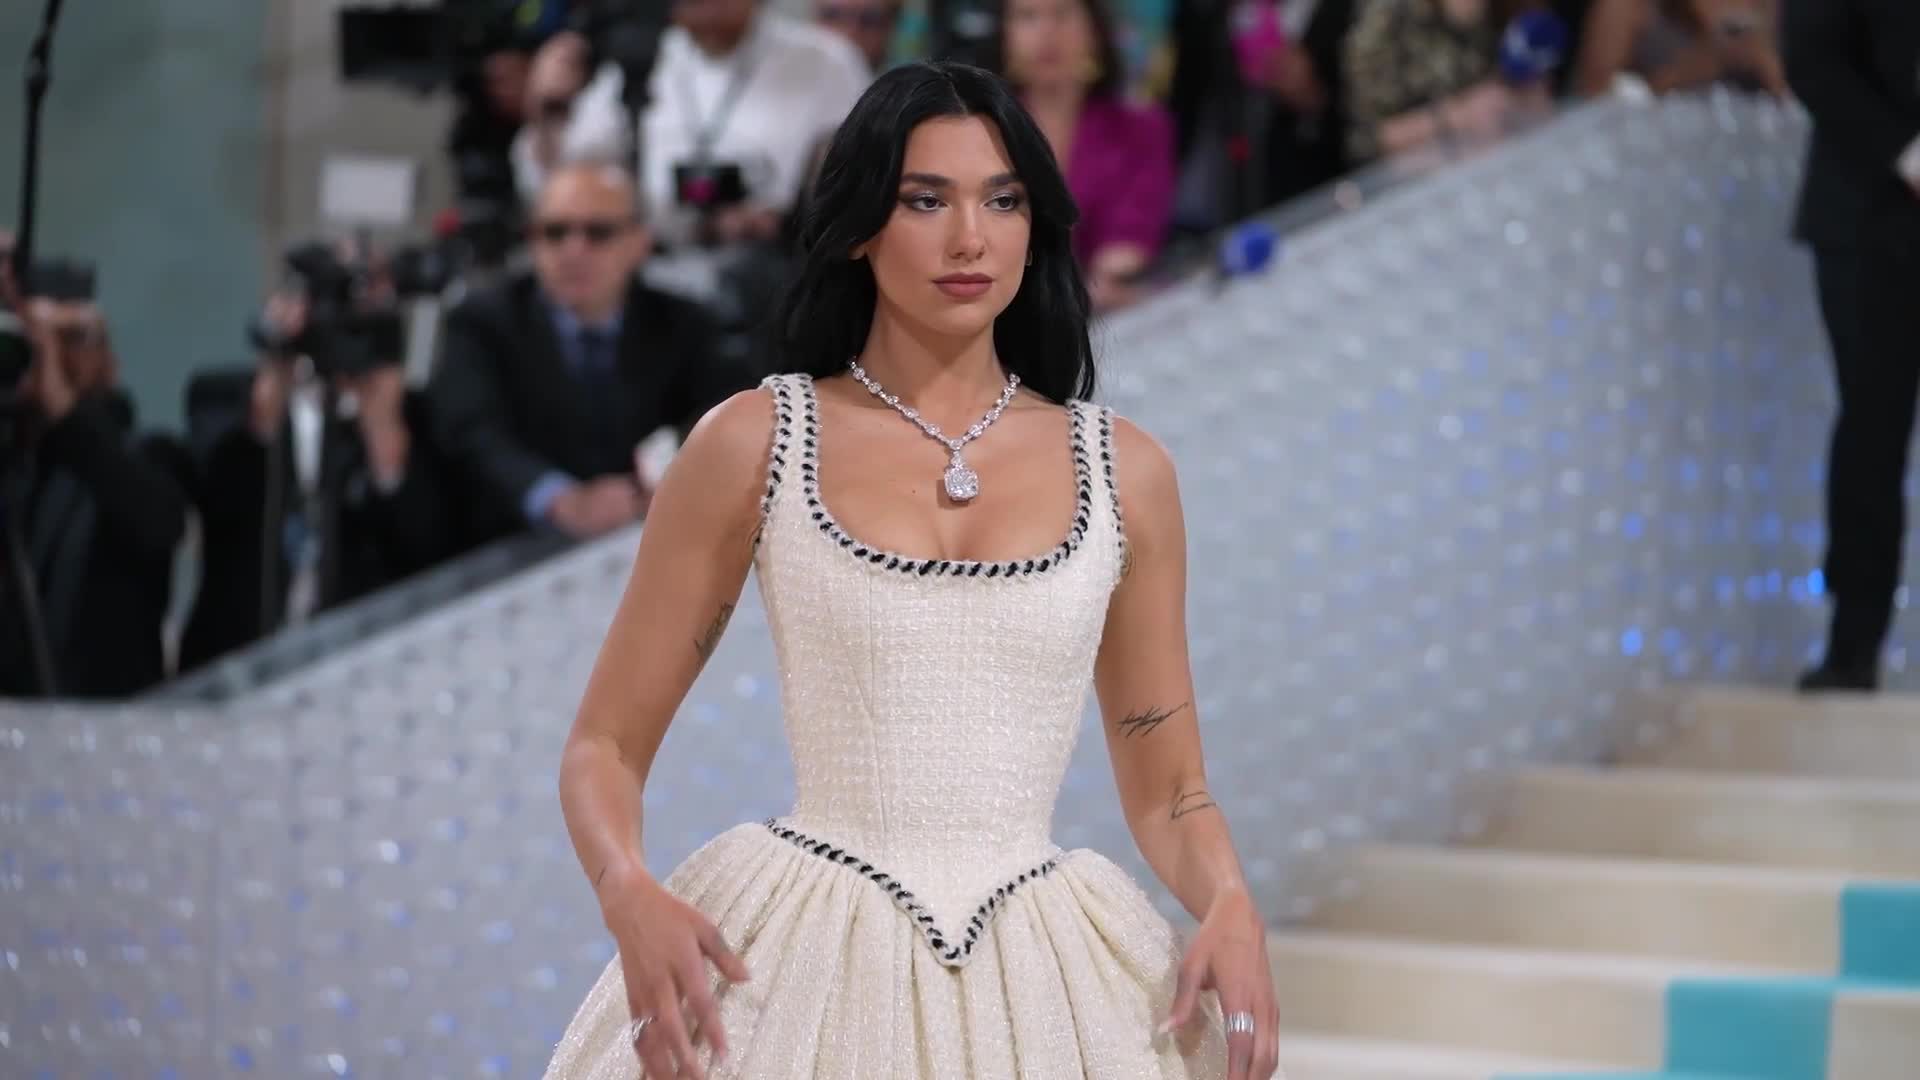 Dua Lipa Wore Vintage Chanel and a History-Making Diamond to the Met Gala